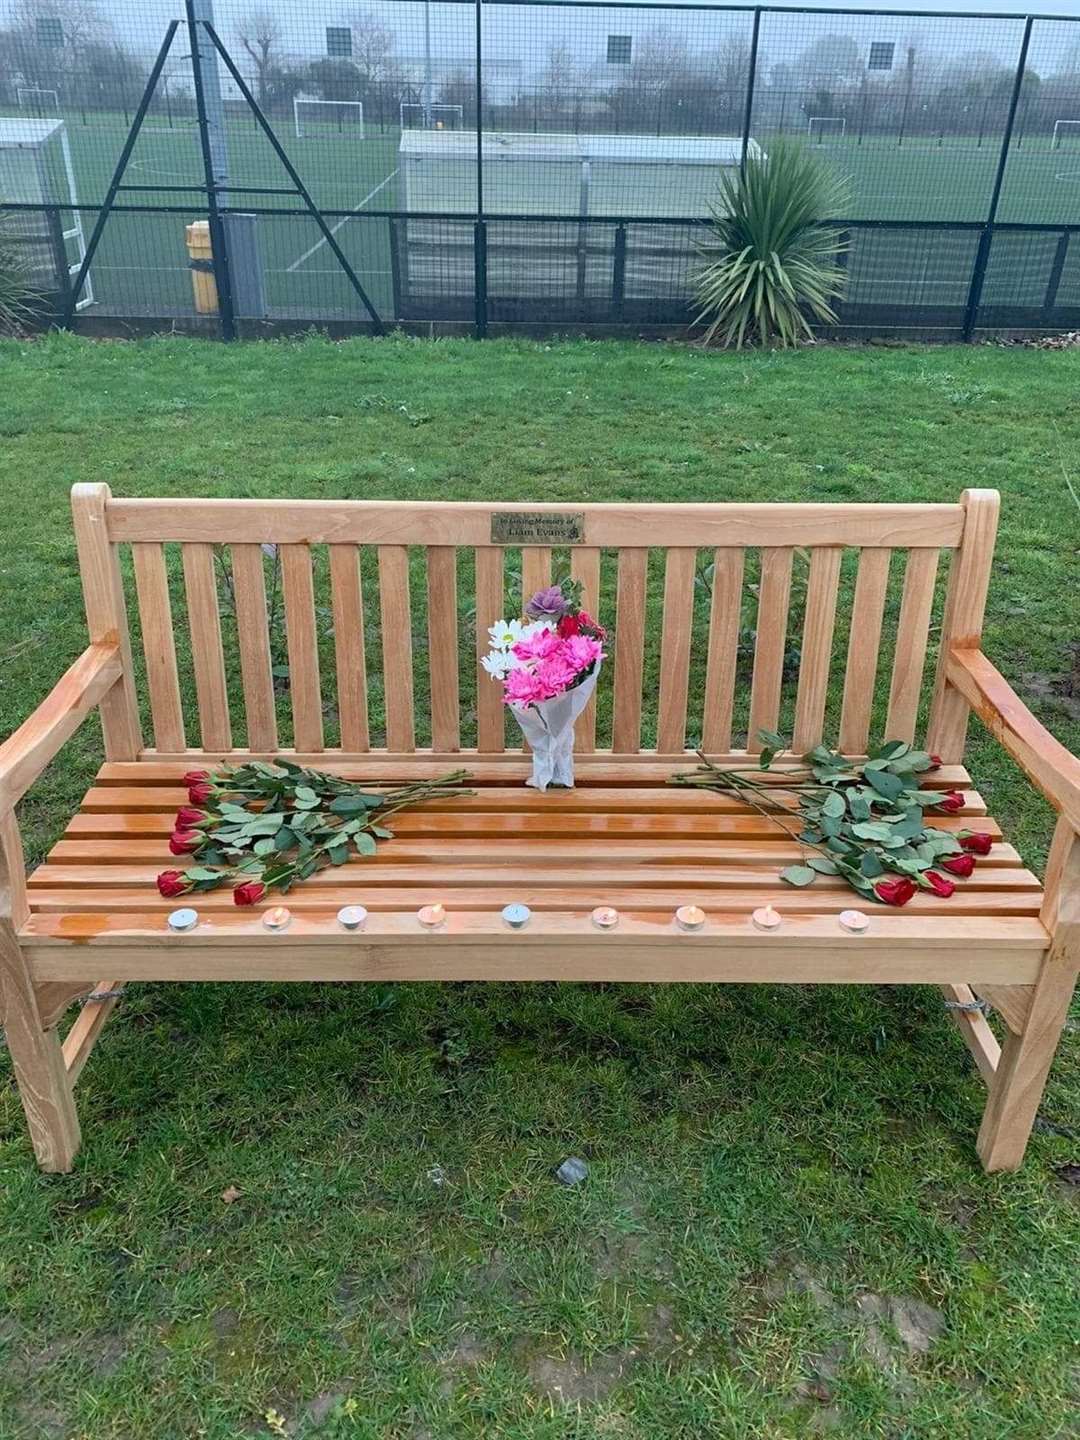 The memorial bench for Liam with flowers left.Picture:Mark Evans